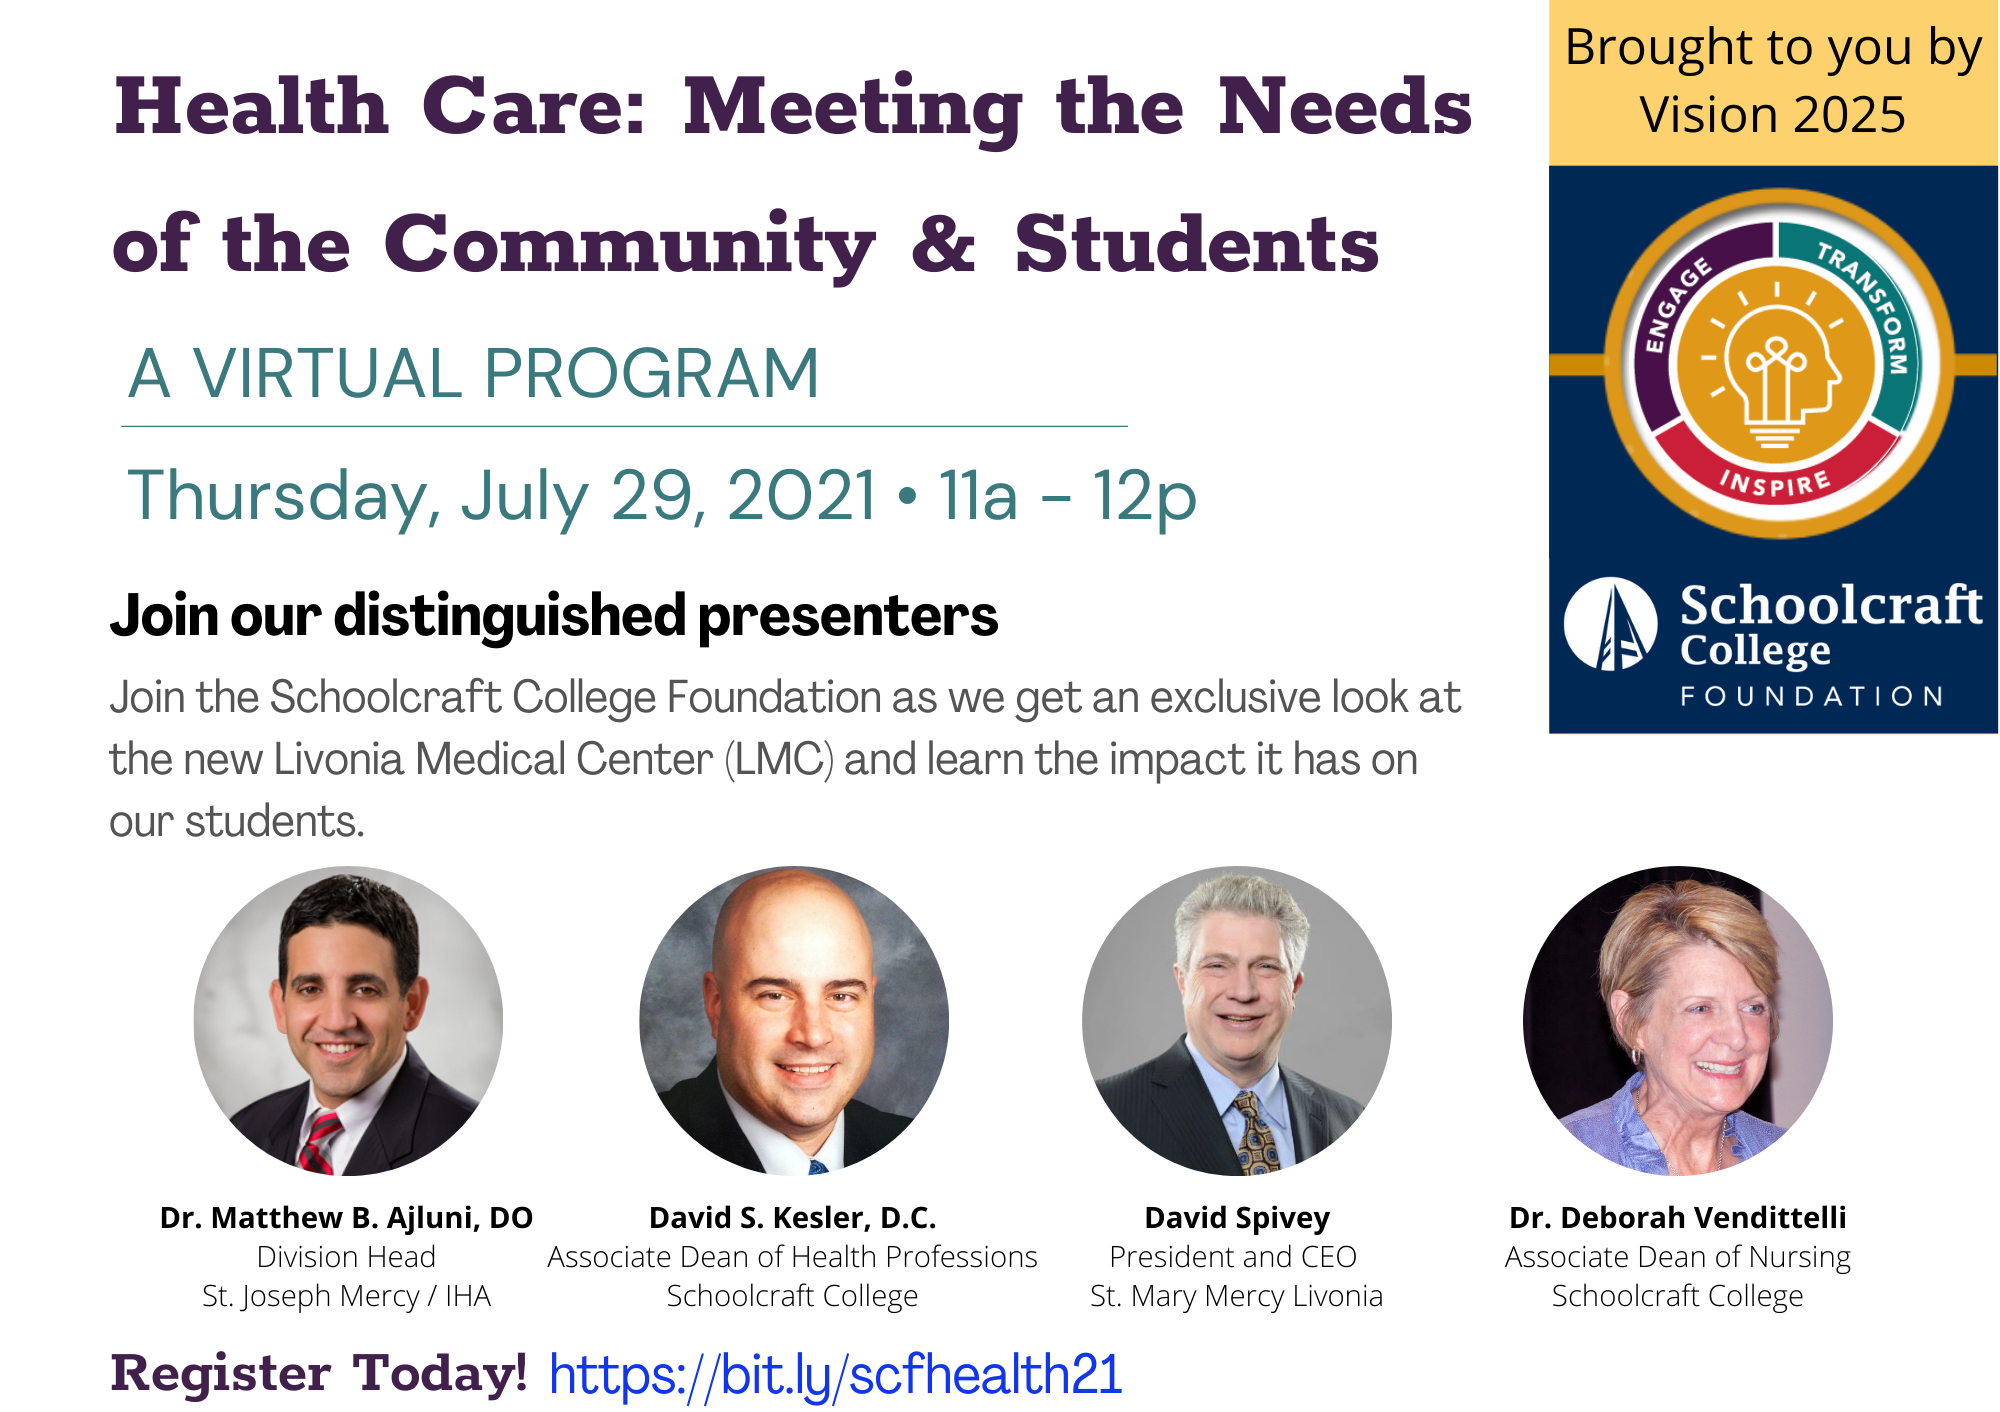 Health Care: Meeting the Needs of the Community & Students Invite